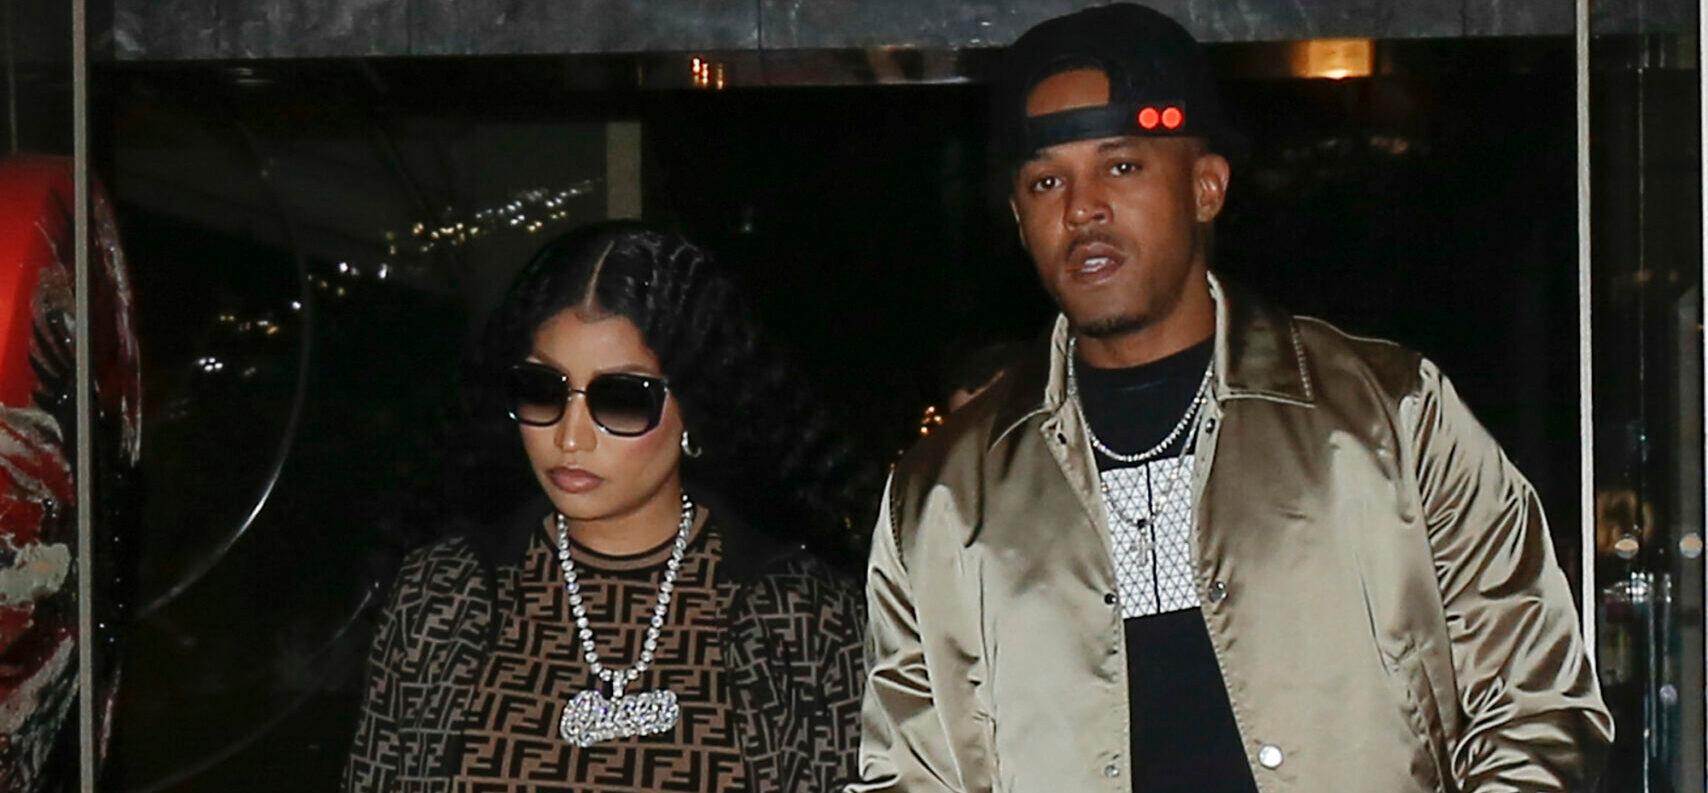 Nicki Minaj Facing $750,000 In Damages Over Husband’s Alleged Attack On Security Guard